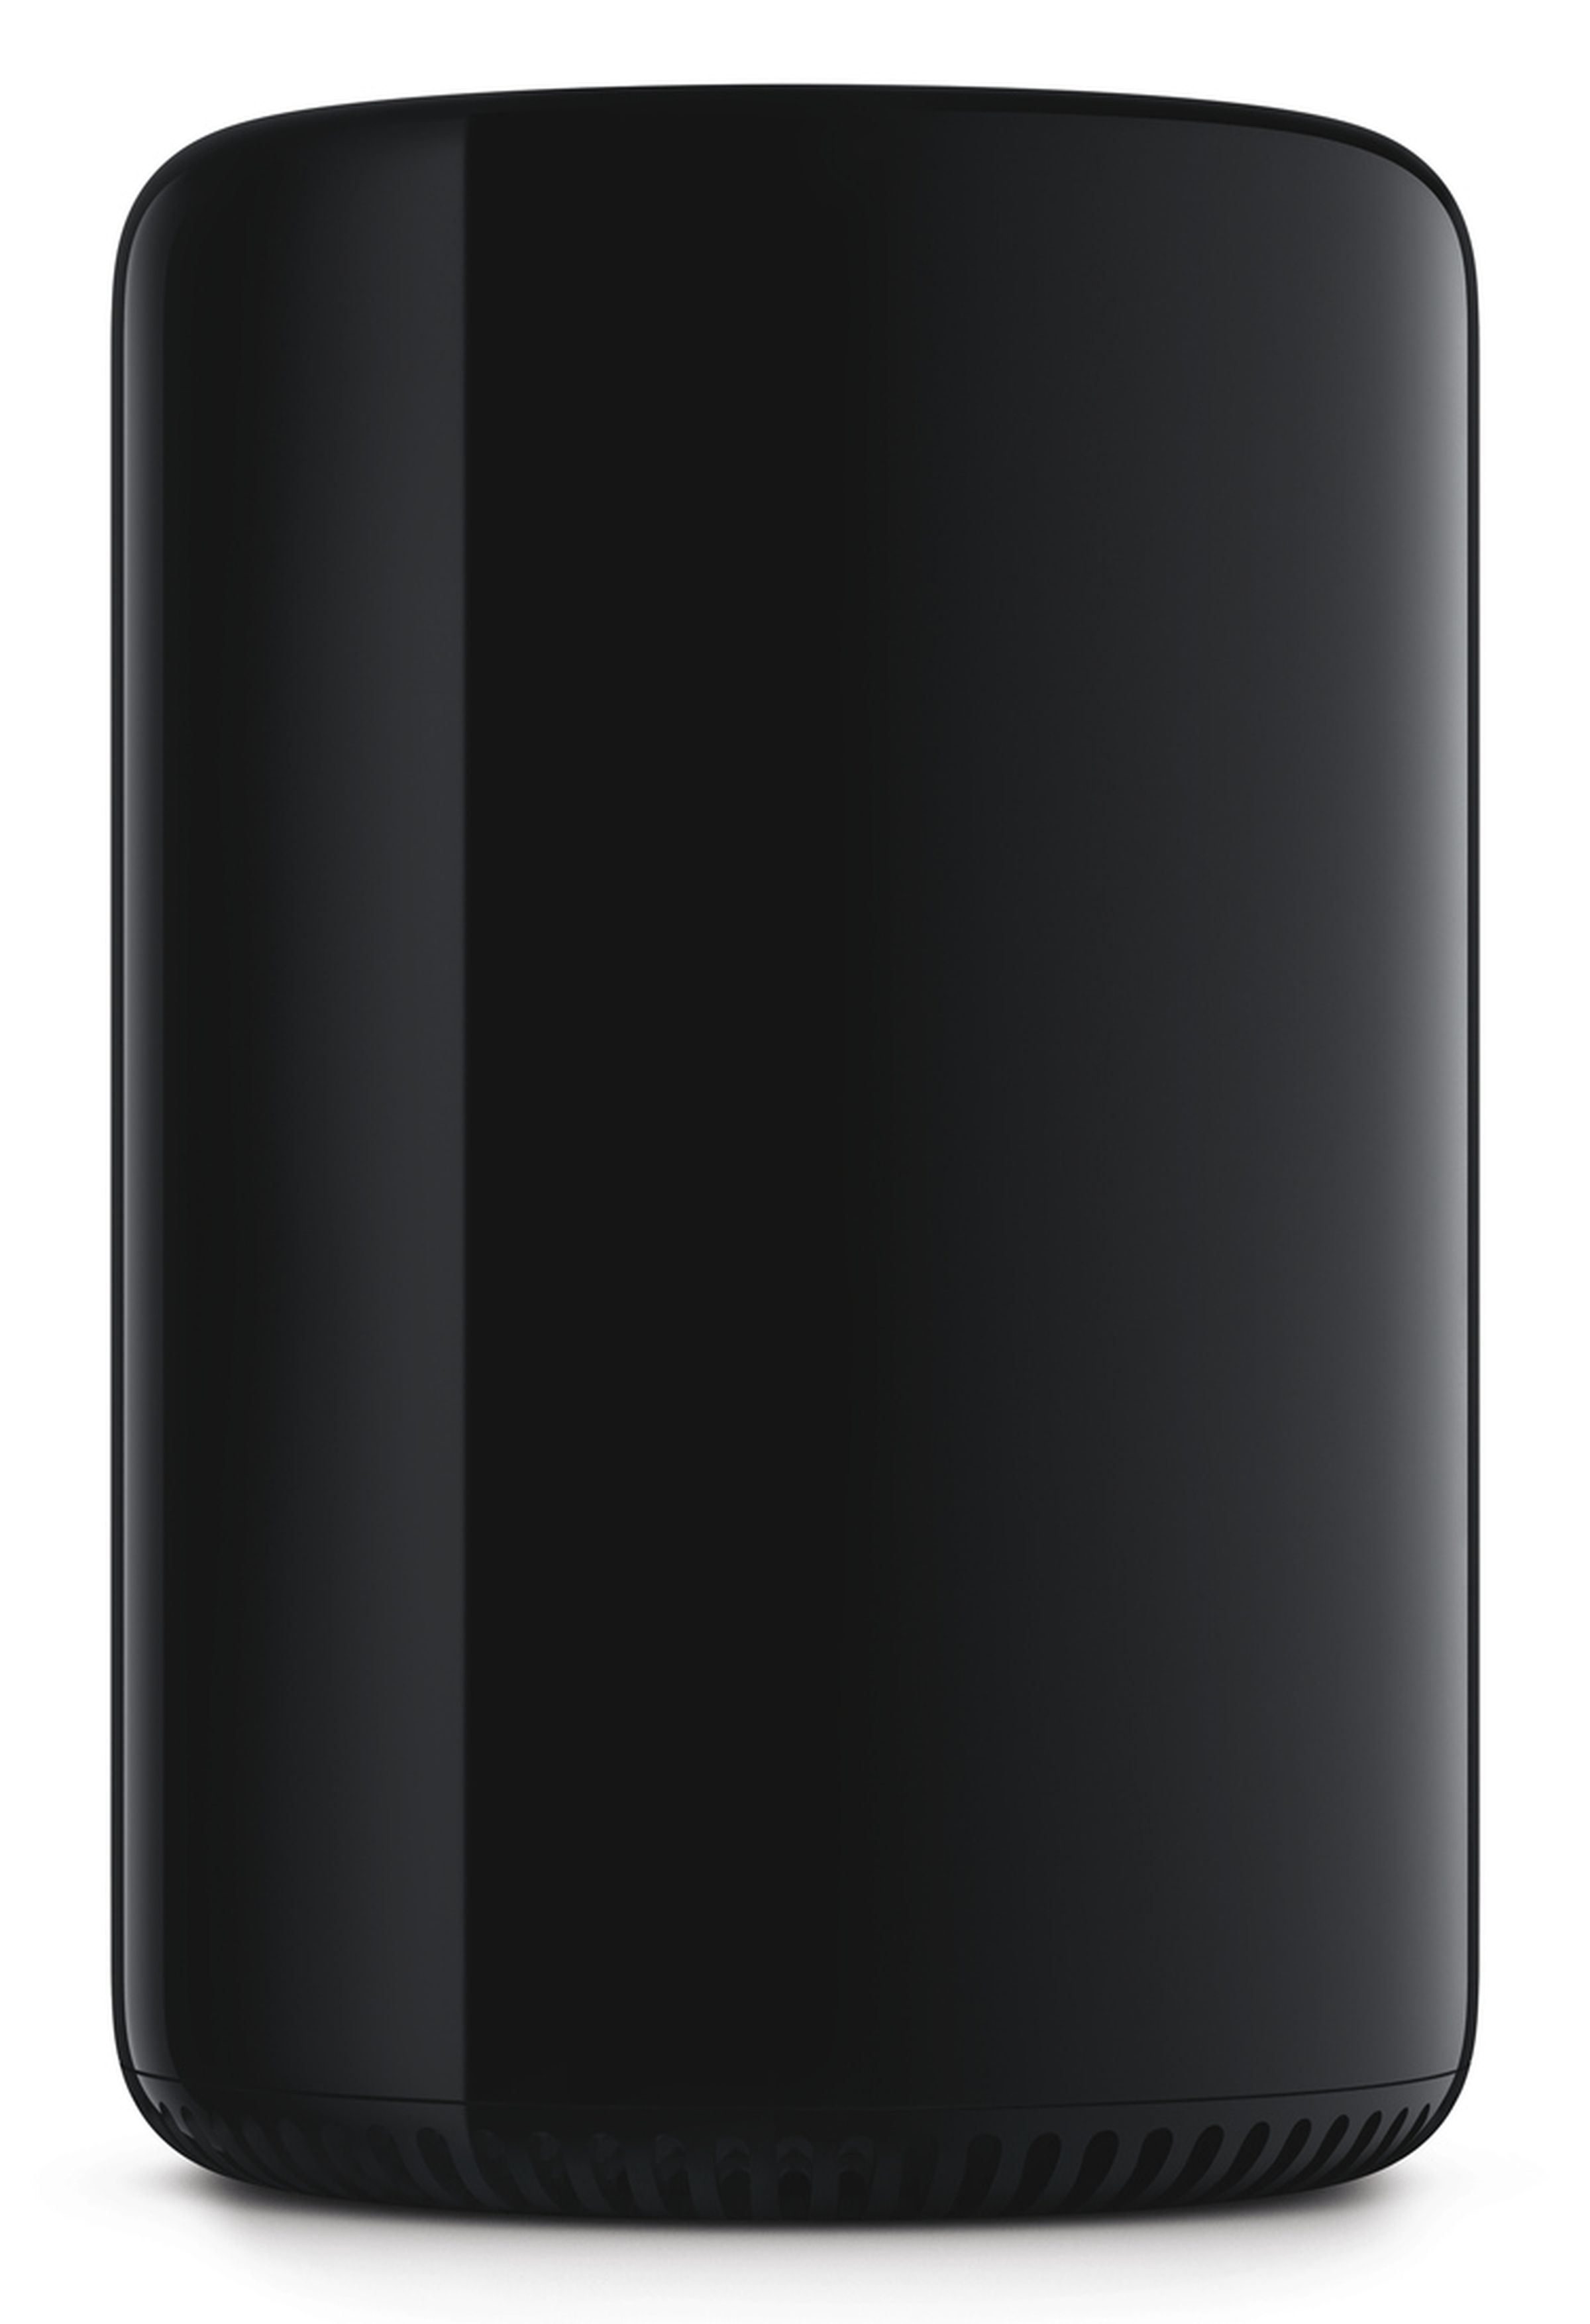 New Mac Pro Teaser Pictures